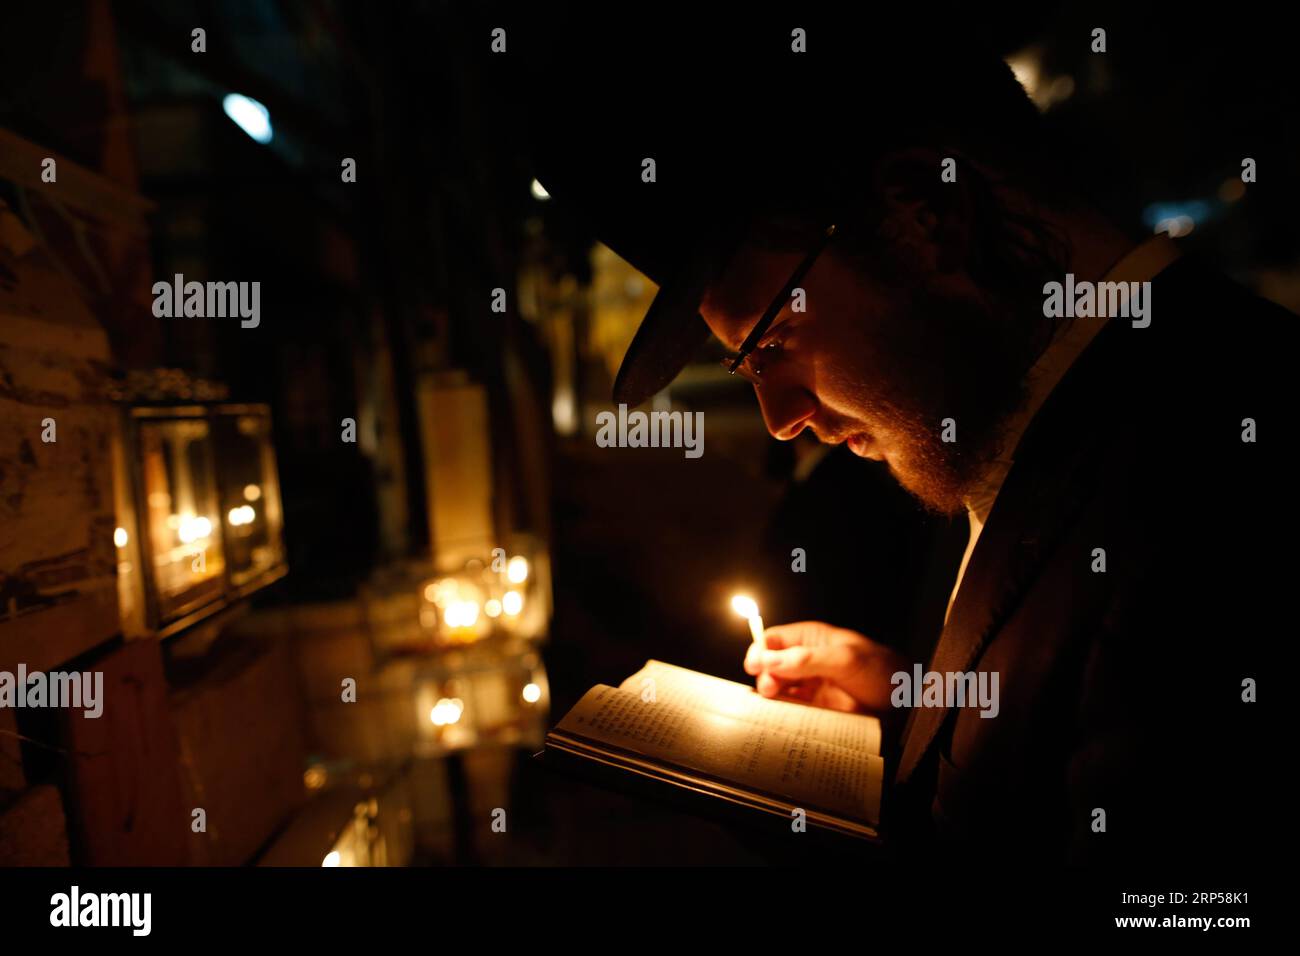 (181203) -- JERUSALEM, Dec. 3, 2018 -- An ultra-Orthodox Jewish man holds a candle during Hanukkah in Mea Shearim neighborhood in Jerusalem, on Dec. 3, 2018. Hanukkah, also known as the Festival of Lights and Feast of Dedication, is an eight-day Jewish holiday commemorating the rededication of the Holy Temple (the Second Temple) in Jerusalem at the time of the Maccabean Revolt against the Seleucid Empire of the 2nd Century B.C. ) MIDEAST-JERUSALEM-HANUKKAH GilxCohenxMagen PUBLICATIONxNOTxINxCHN Stock Photo